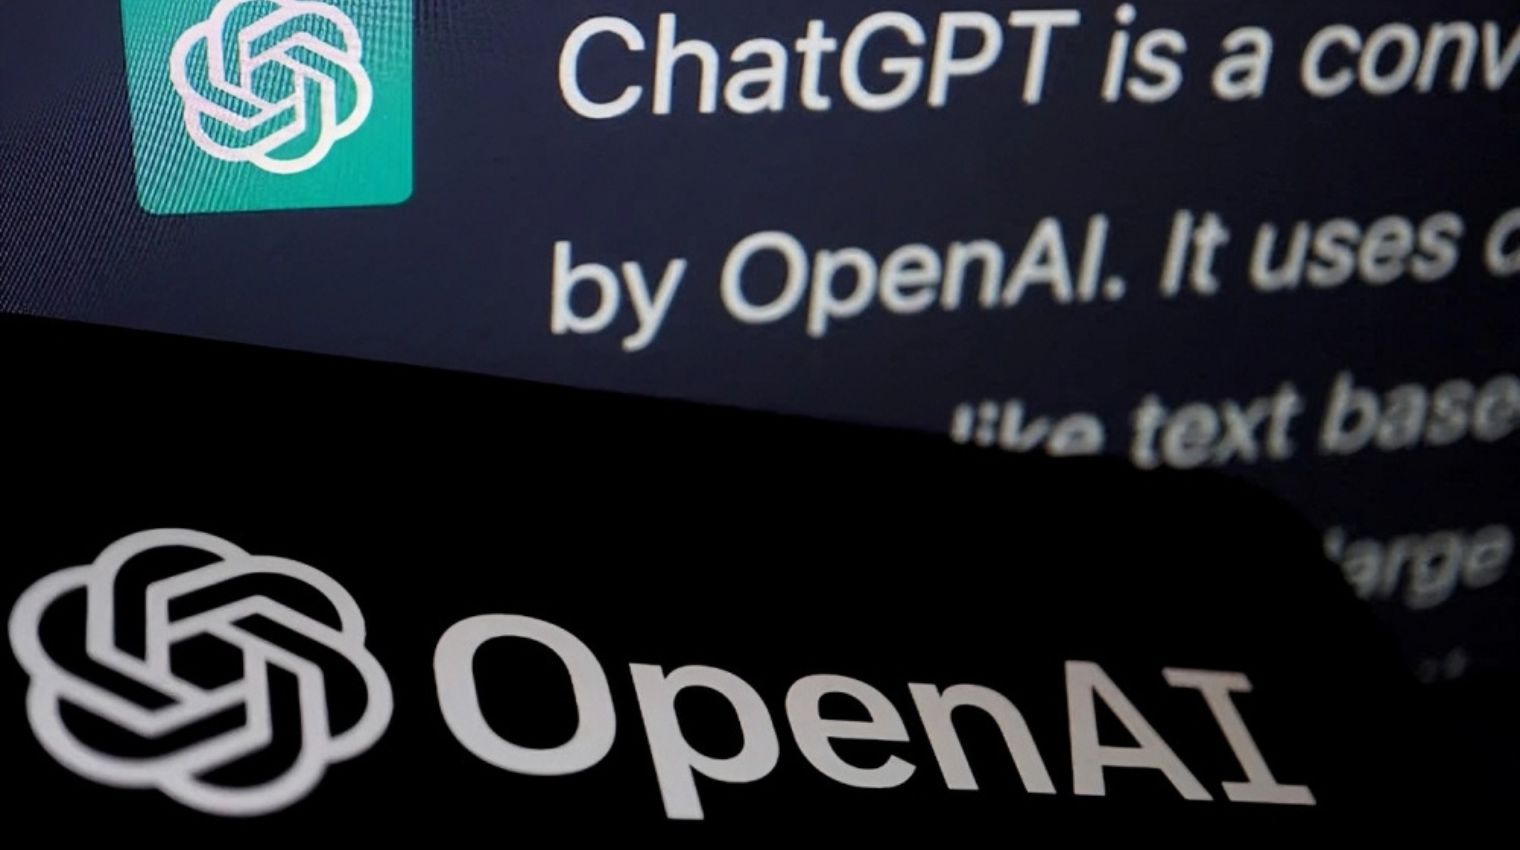 “OpenAI Now Allows Unconditional Storage of ChatGPT Conversations”